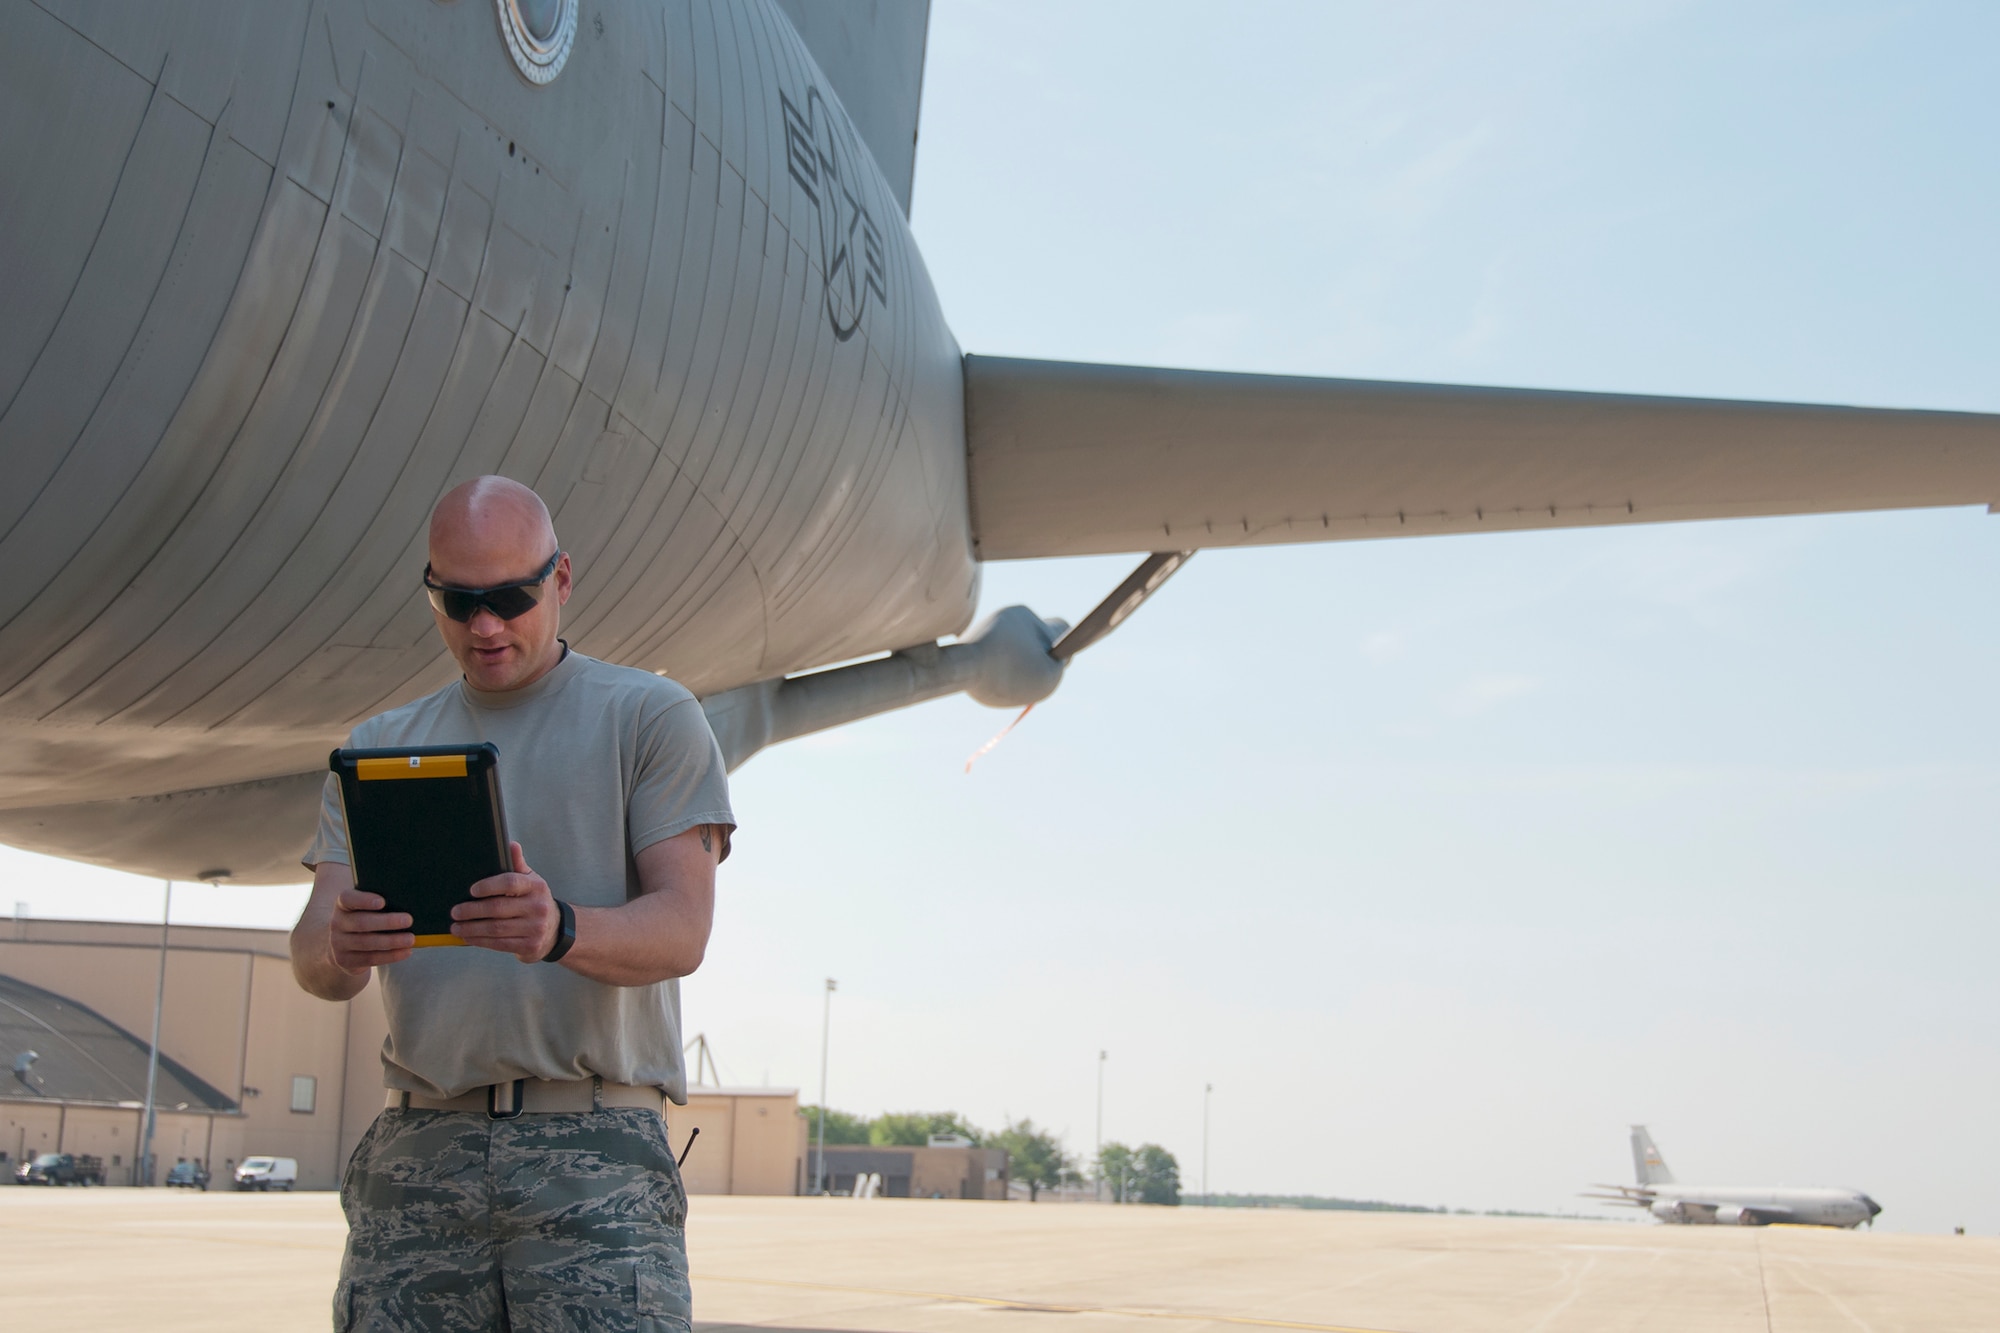 Senior Master Sgt. Ash Payton, 459th Maintenance Group aircraft overhaul supervisor, discusses a repair with one of his Airmen at a separate KC-135R Stratotanker location via video chat on the Joint Base Andrews, Md., flight line, May 26. Last week the 459th MXG obtained data connection on its tablets, which afforded access to communication applications such as instant messenger and video chat. This new capability allows maintainers to send imagery, instantly reach the shop or supervision, as well as discuss repair issues from separate locations in real-time through video stream. (U.S. Air Force photo/ Staff Sgt. Kat Justen)